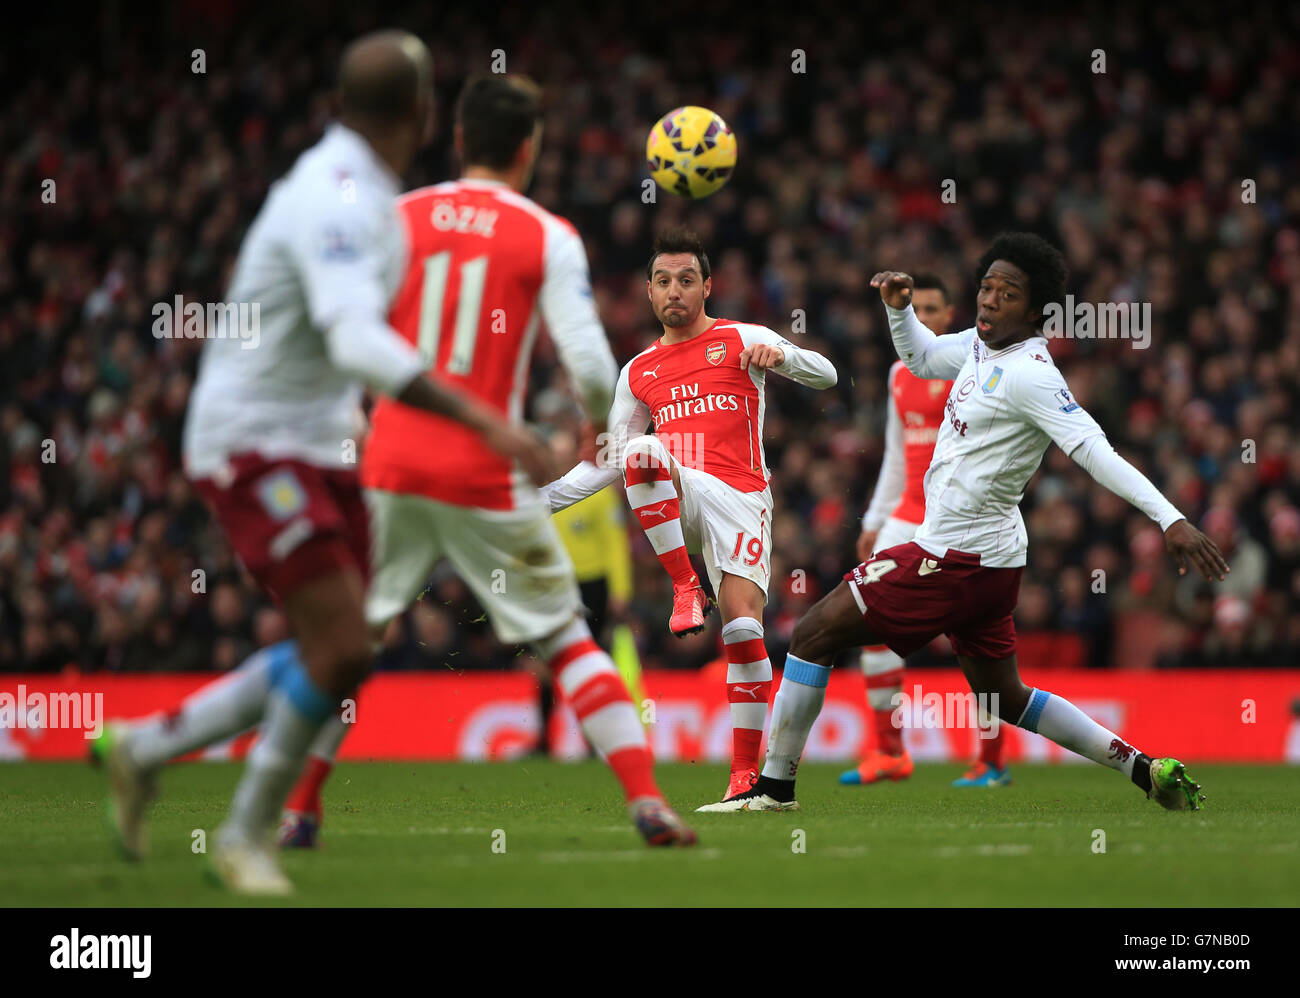 Arsenal's Santi Cazorla chips ball during the Barclays Premier League match at the Emirates Stadium, London. Stock Photo